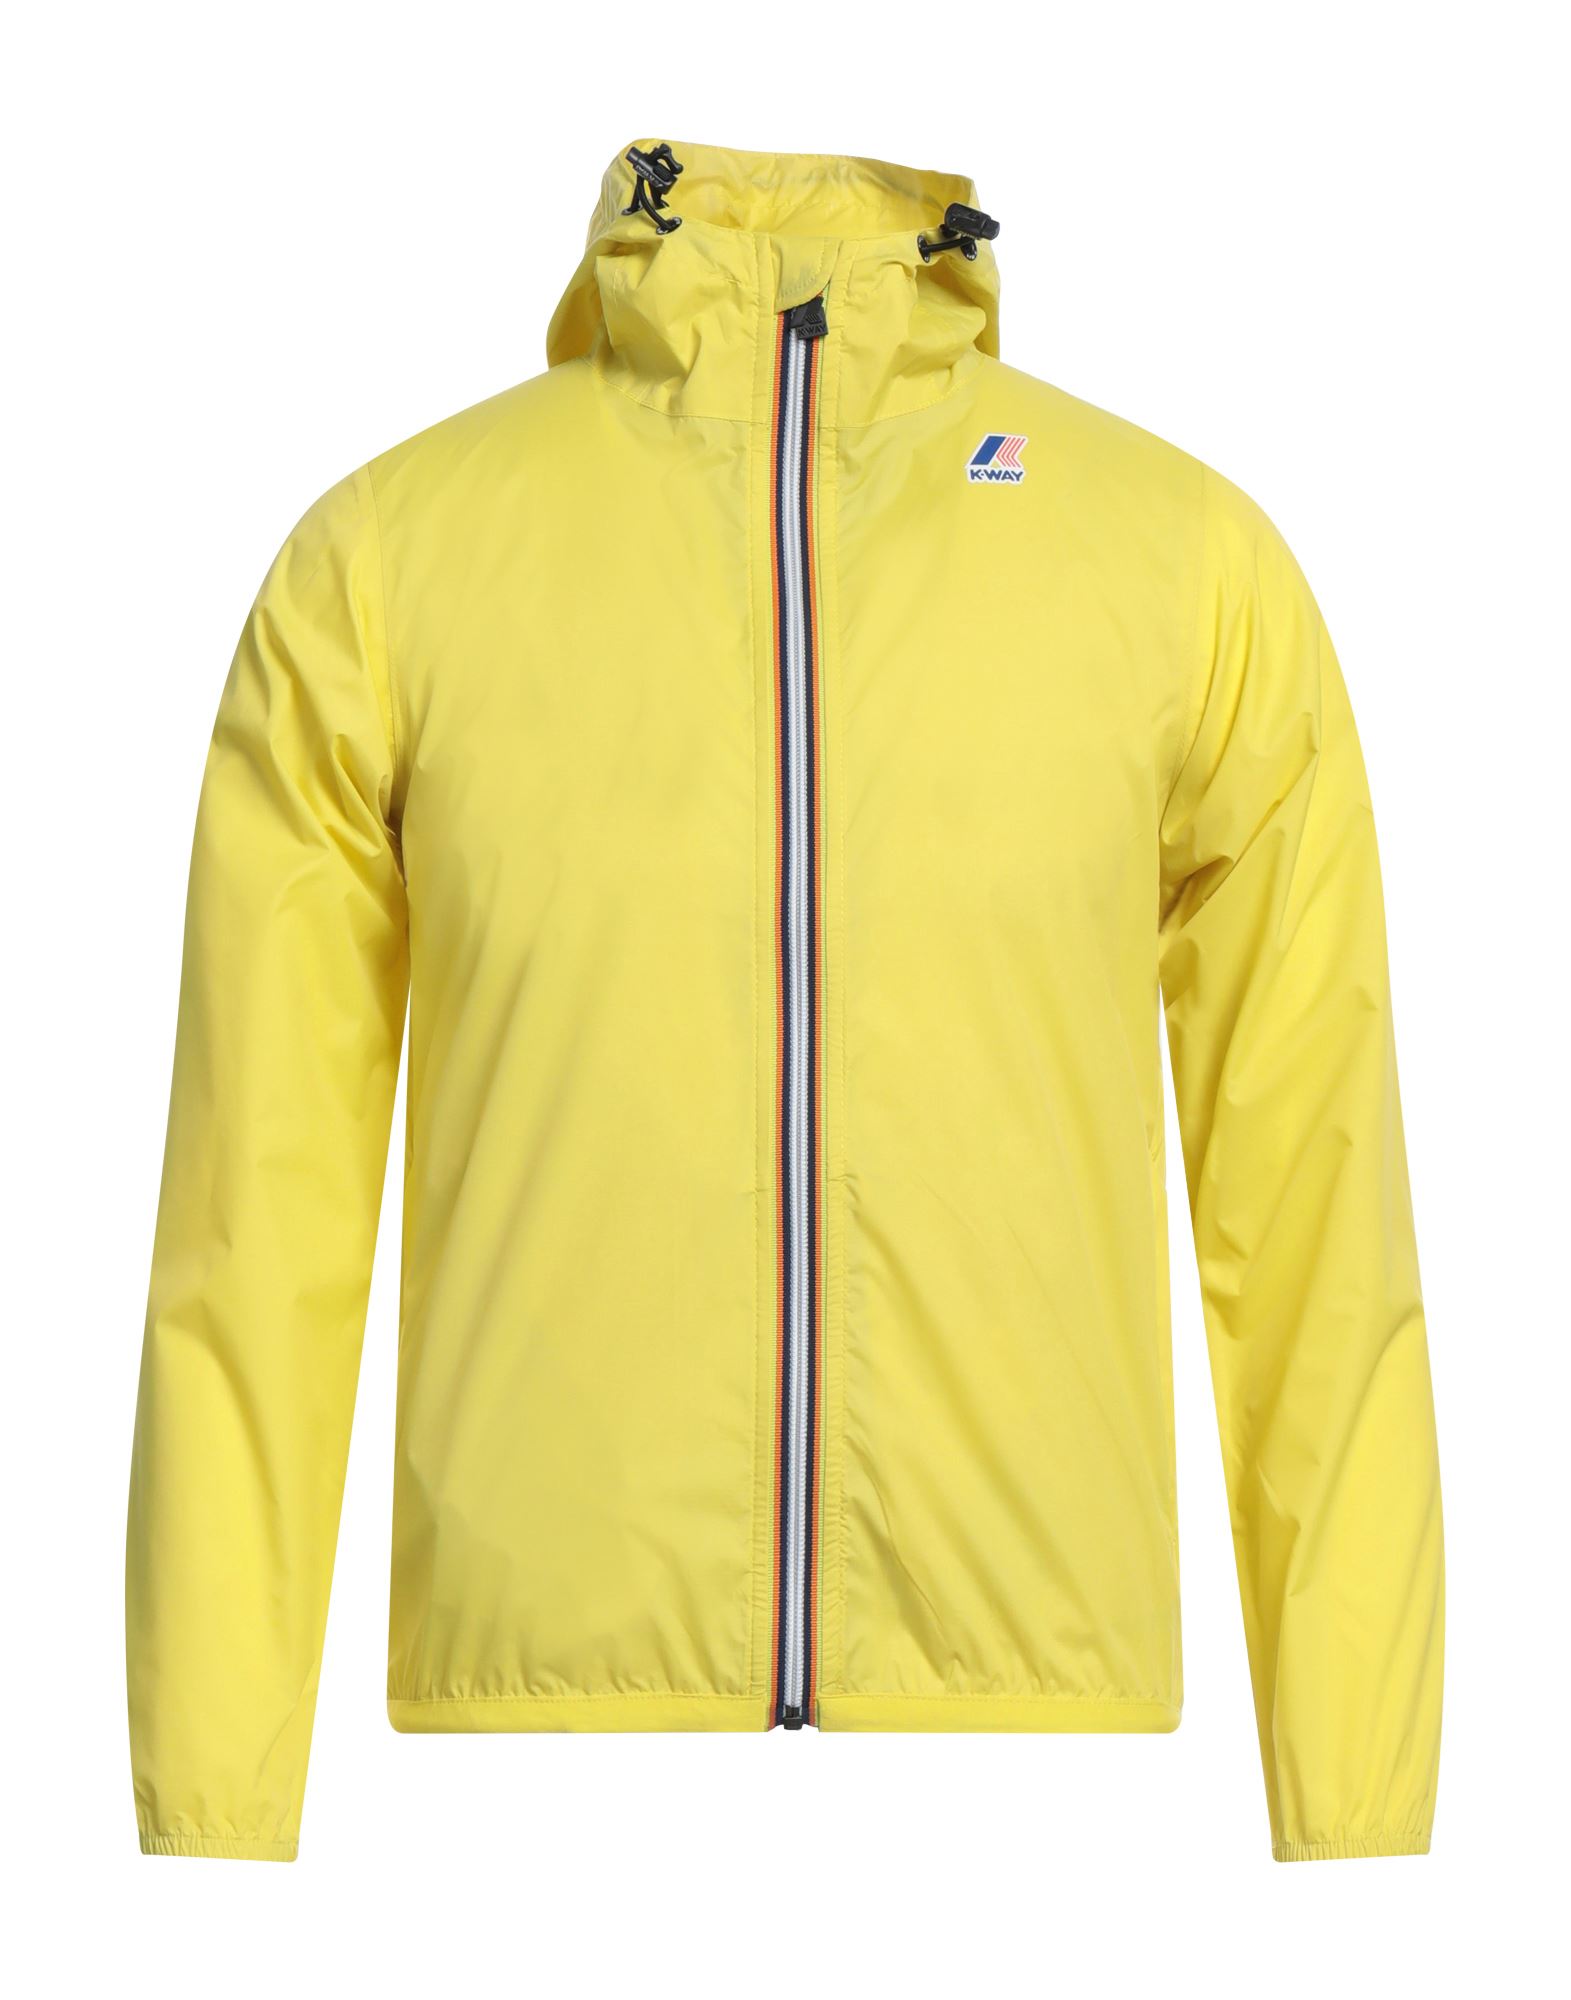 K-way Jackets In Light Yellow